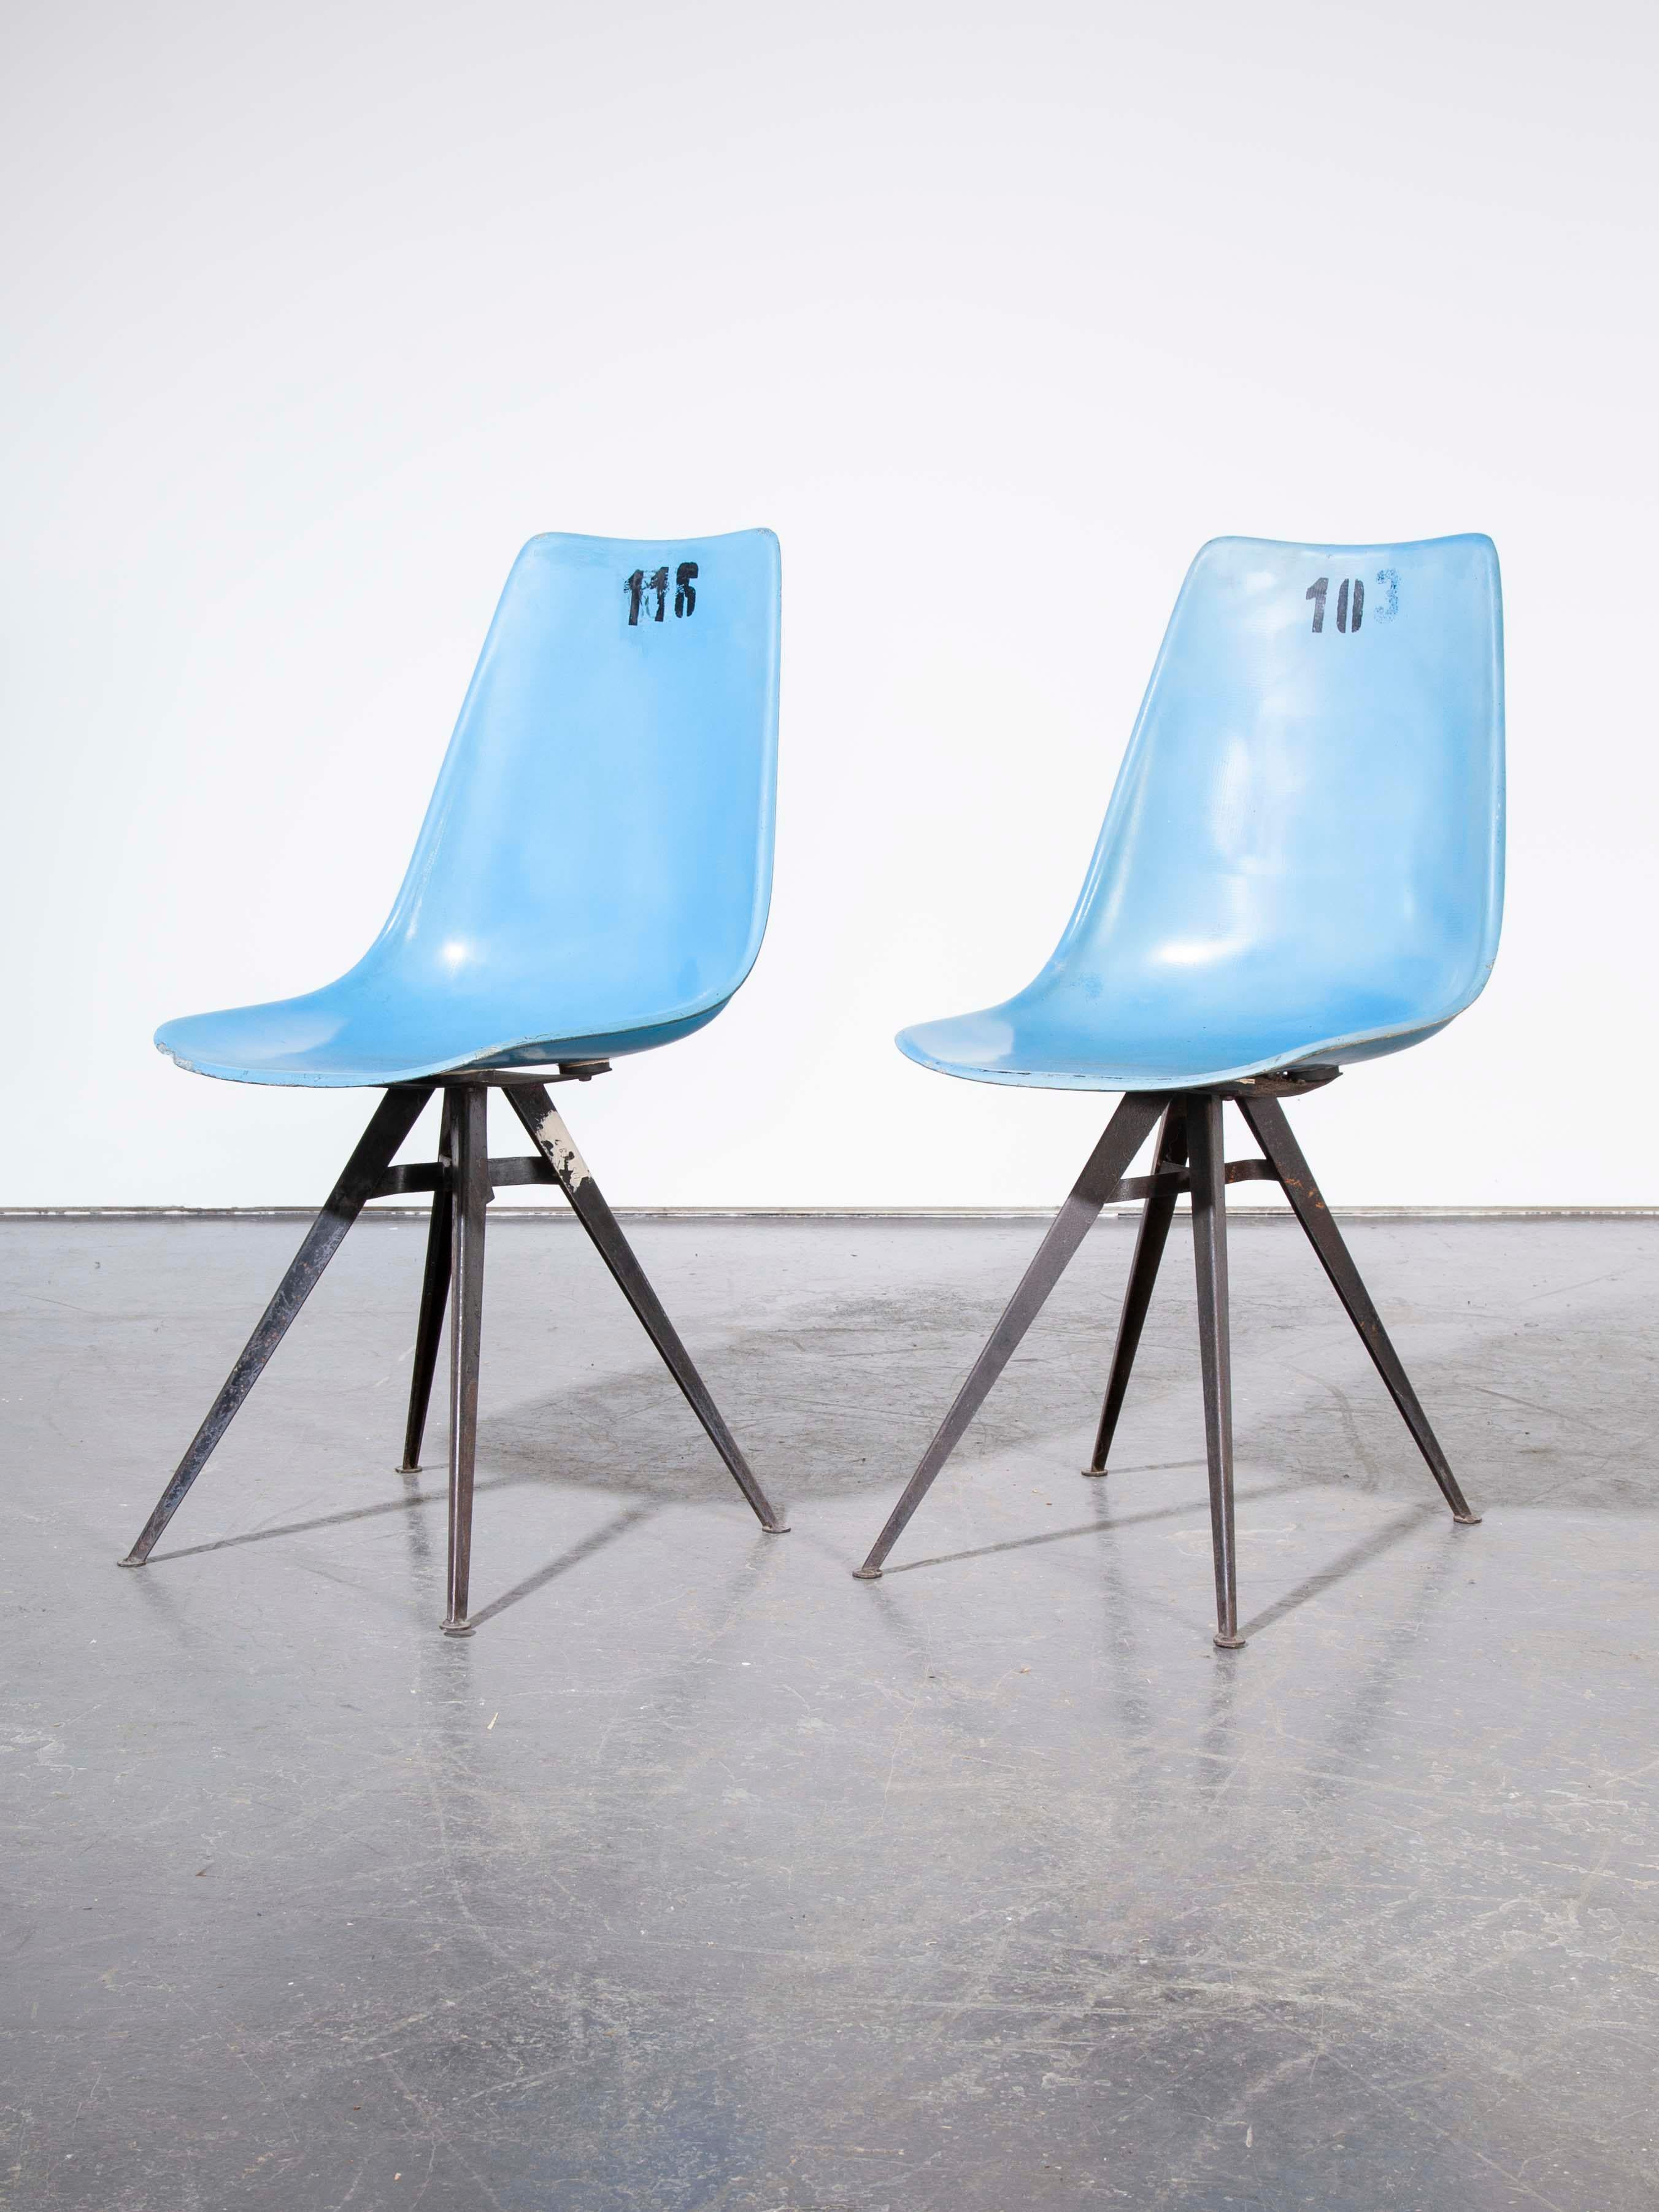 1960s pair of original blue fiberglass side / dining chairs.

1960s vintage pair of original blue fiberglass side / dining chairs. Sourced from a sports stadium outside Prague these numbered chairs have a great shape and a fabulous angular base.